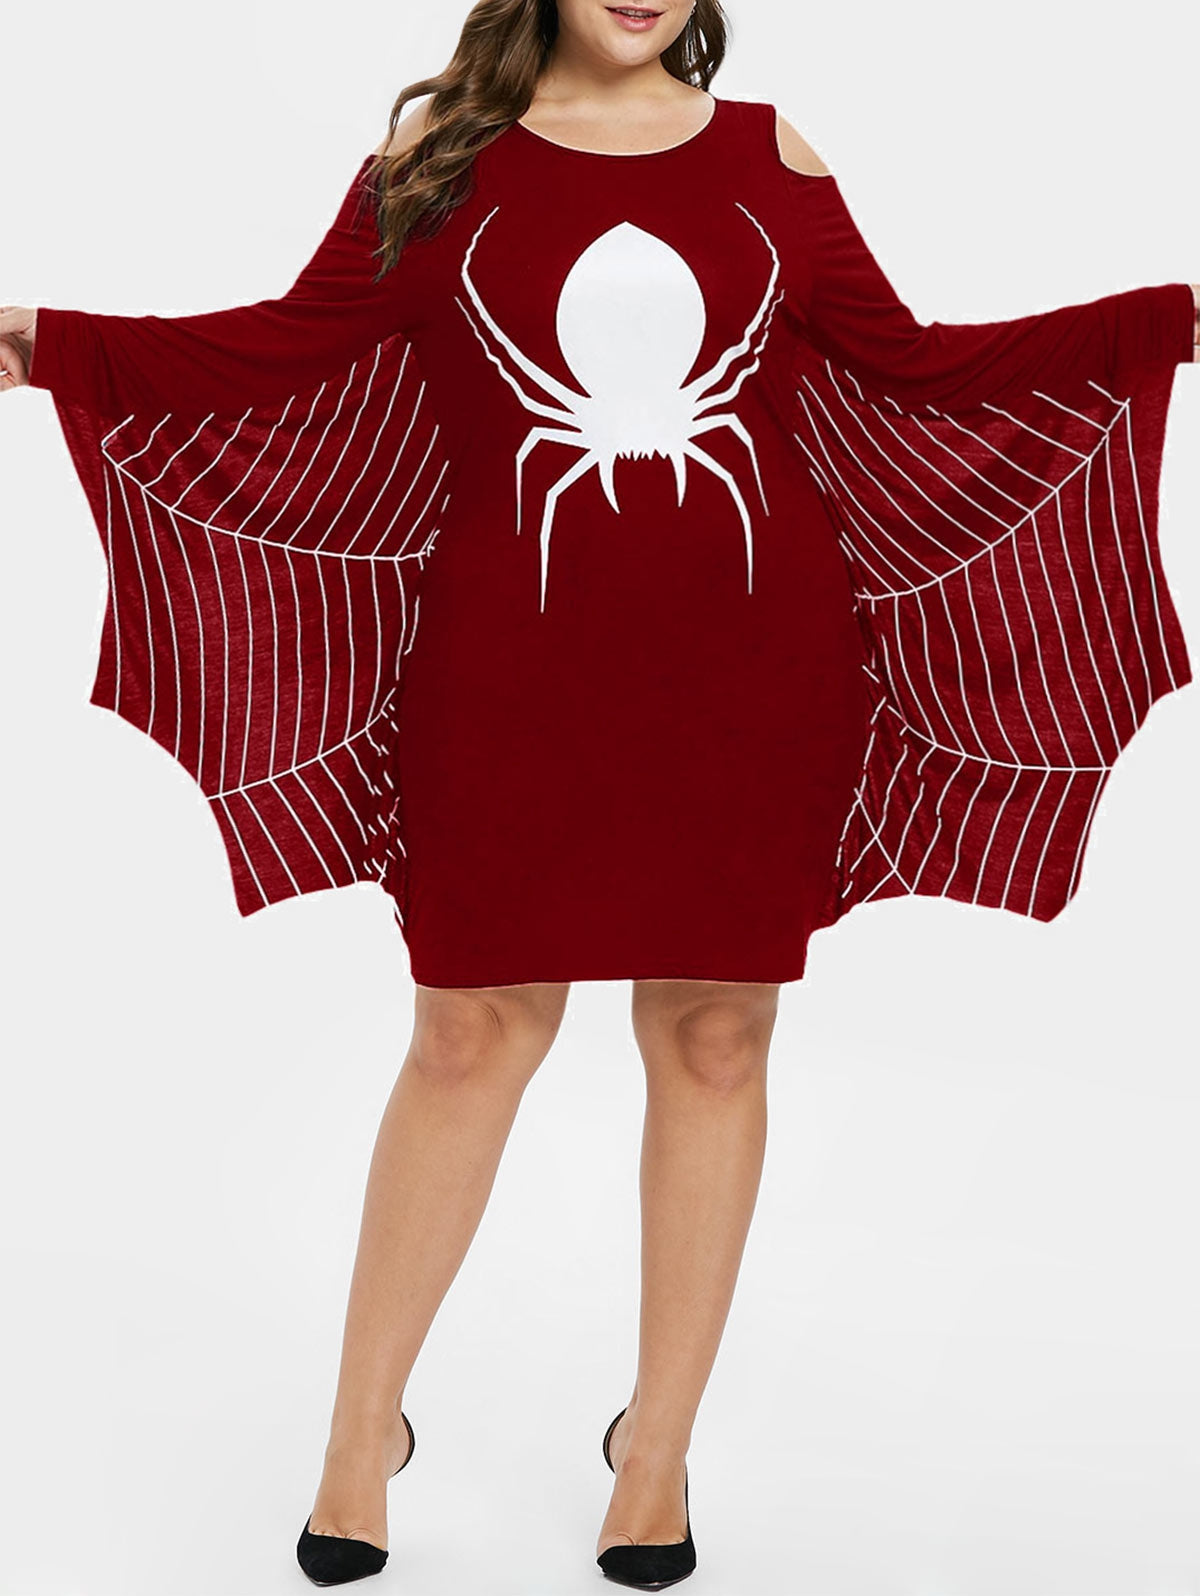 Plus Size Halloween Spider Net Print Batwing Sleeve Dress Sz. (L) Color: (Red Wine)